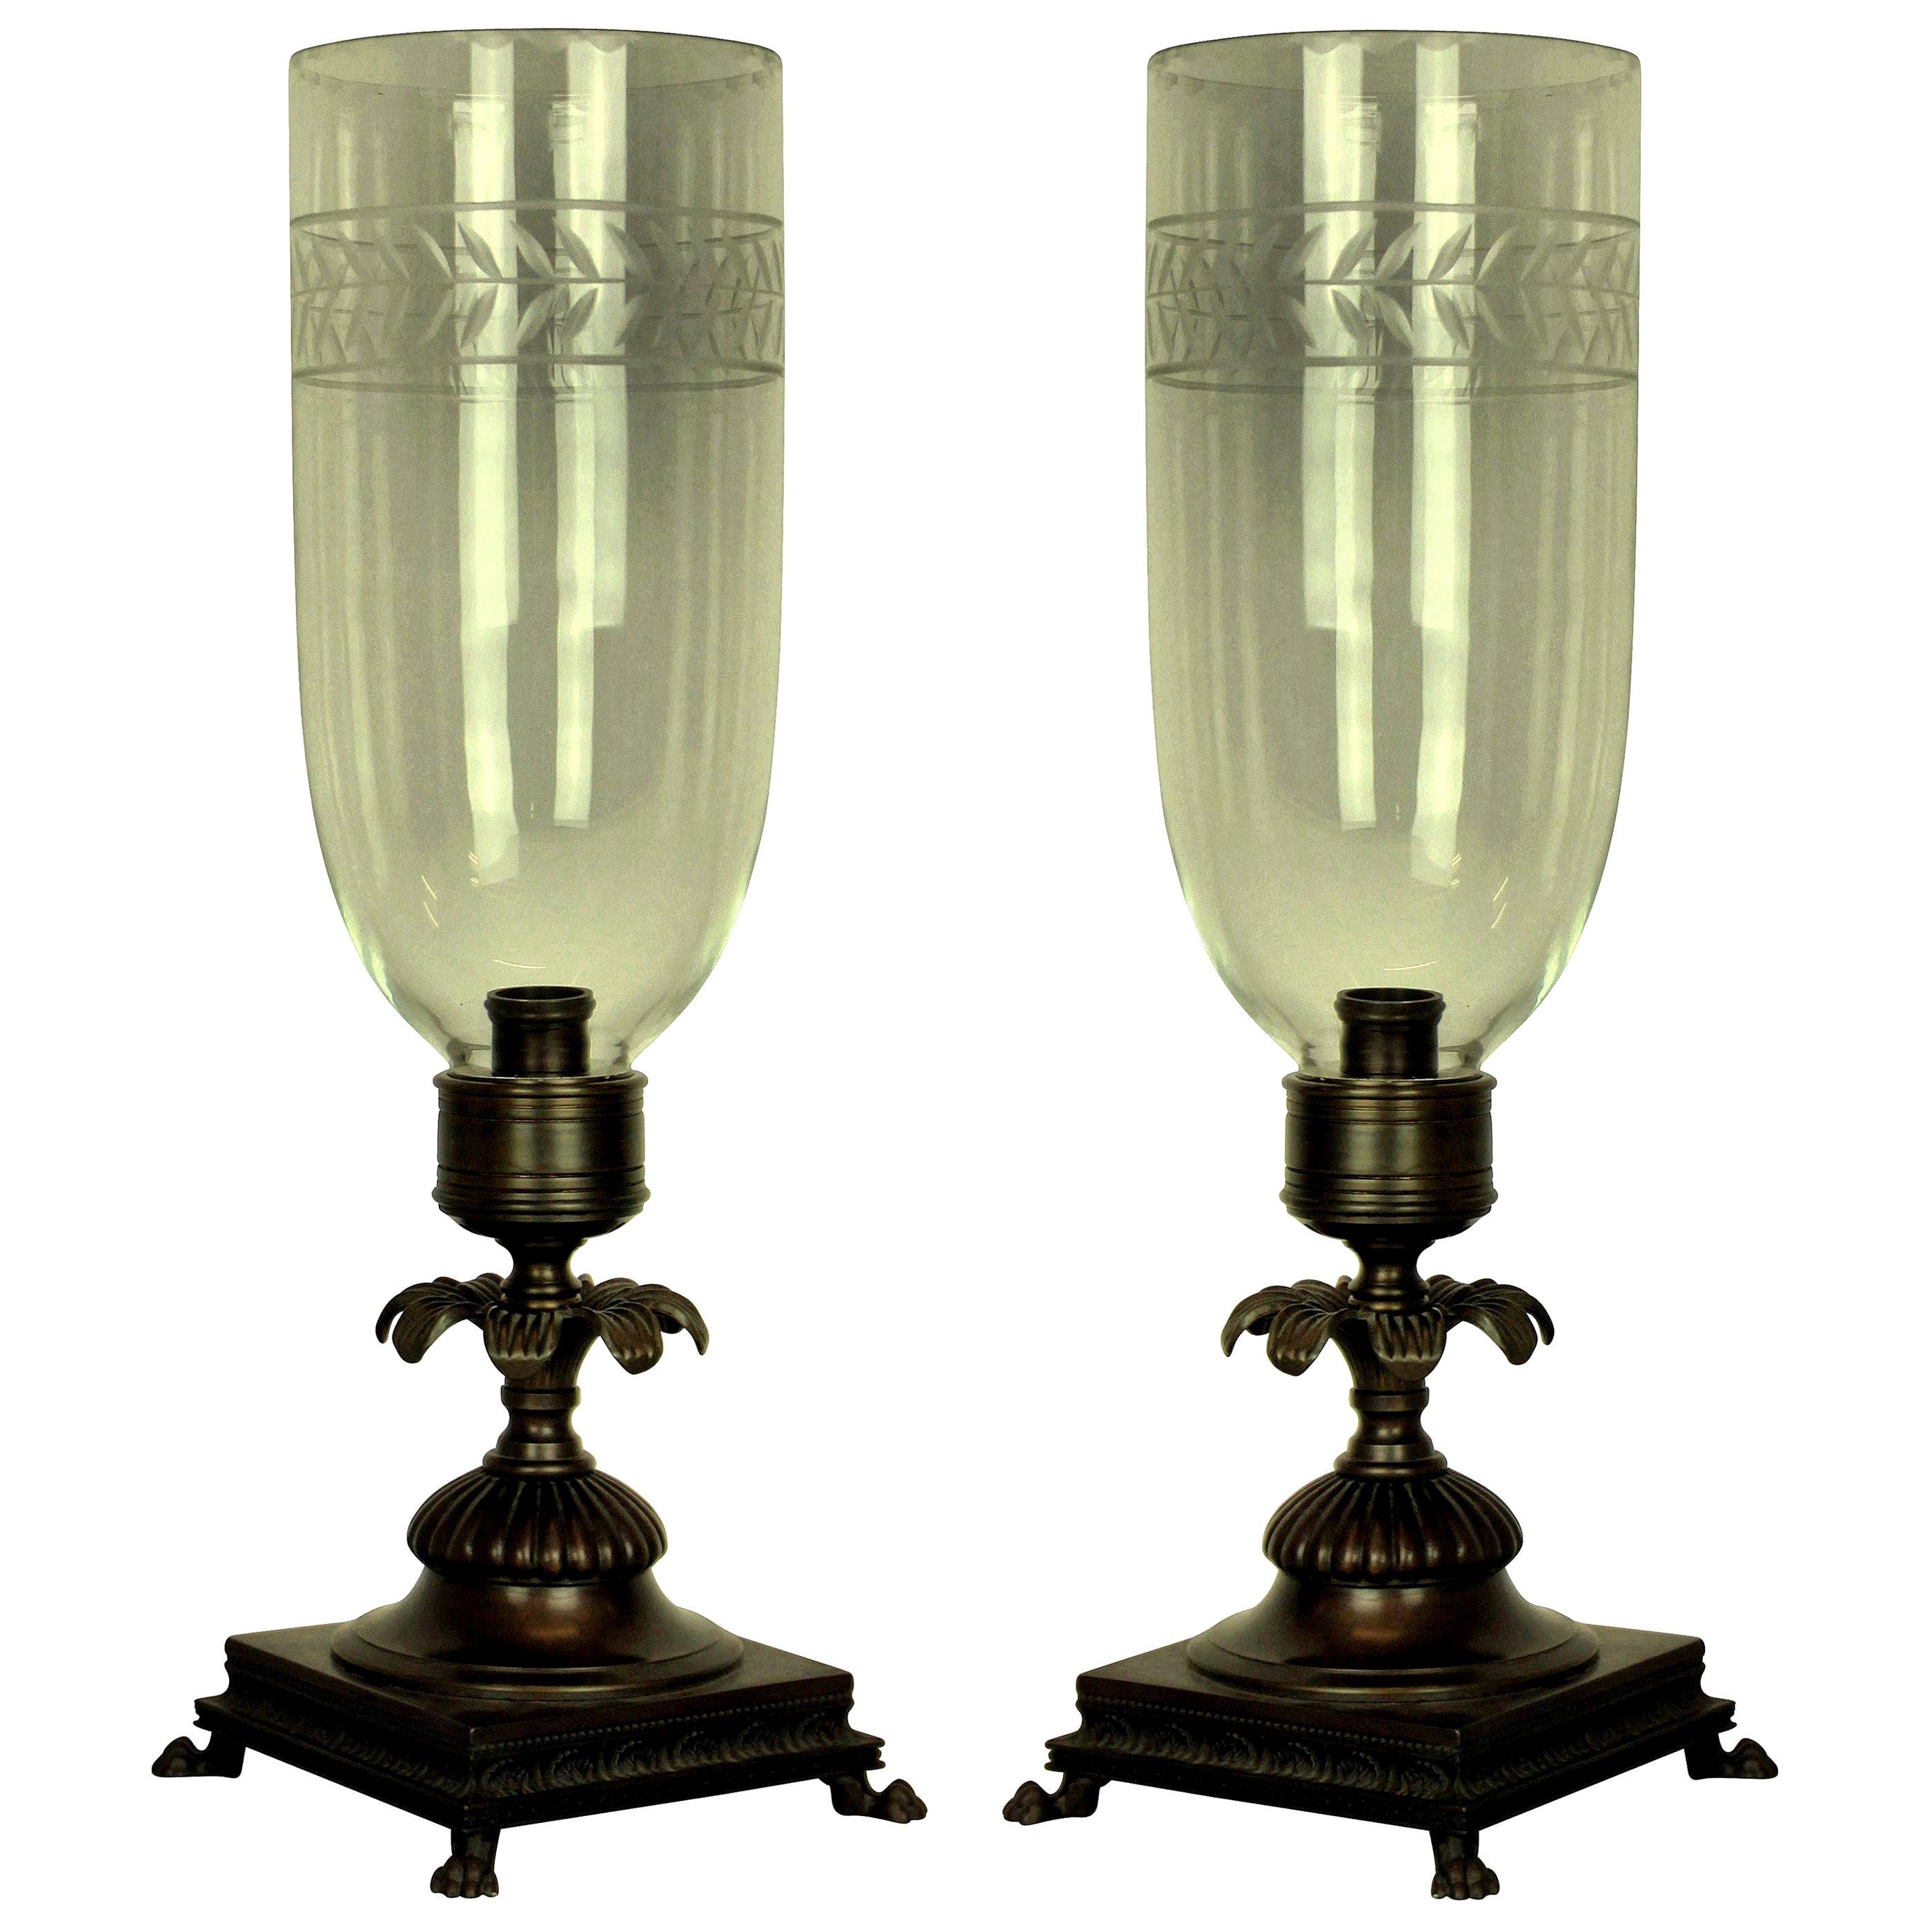 Pair of Regency Style Candlesticks with Storm Lights